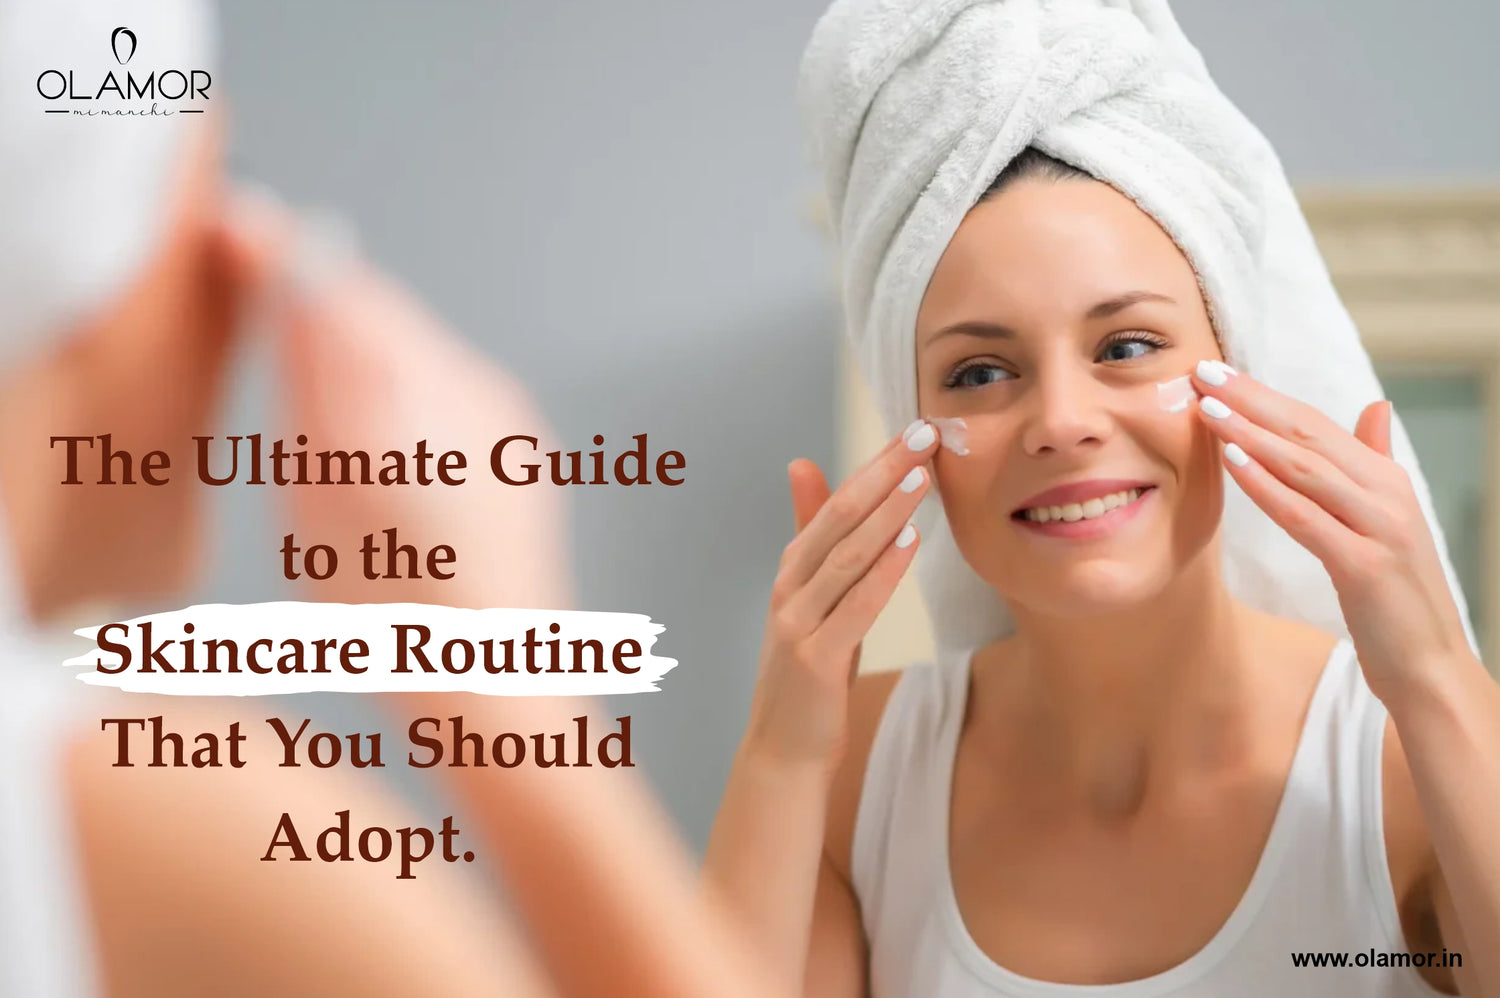 The Ultimate Guide to the Skincare Routine That You Should Adopt